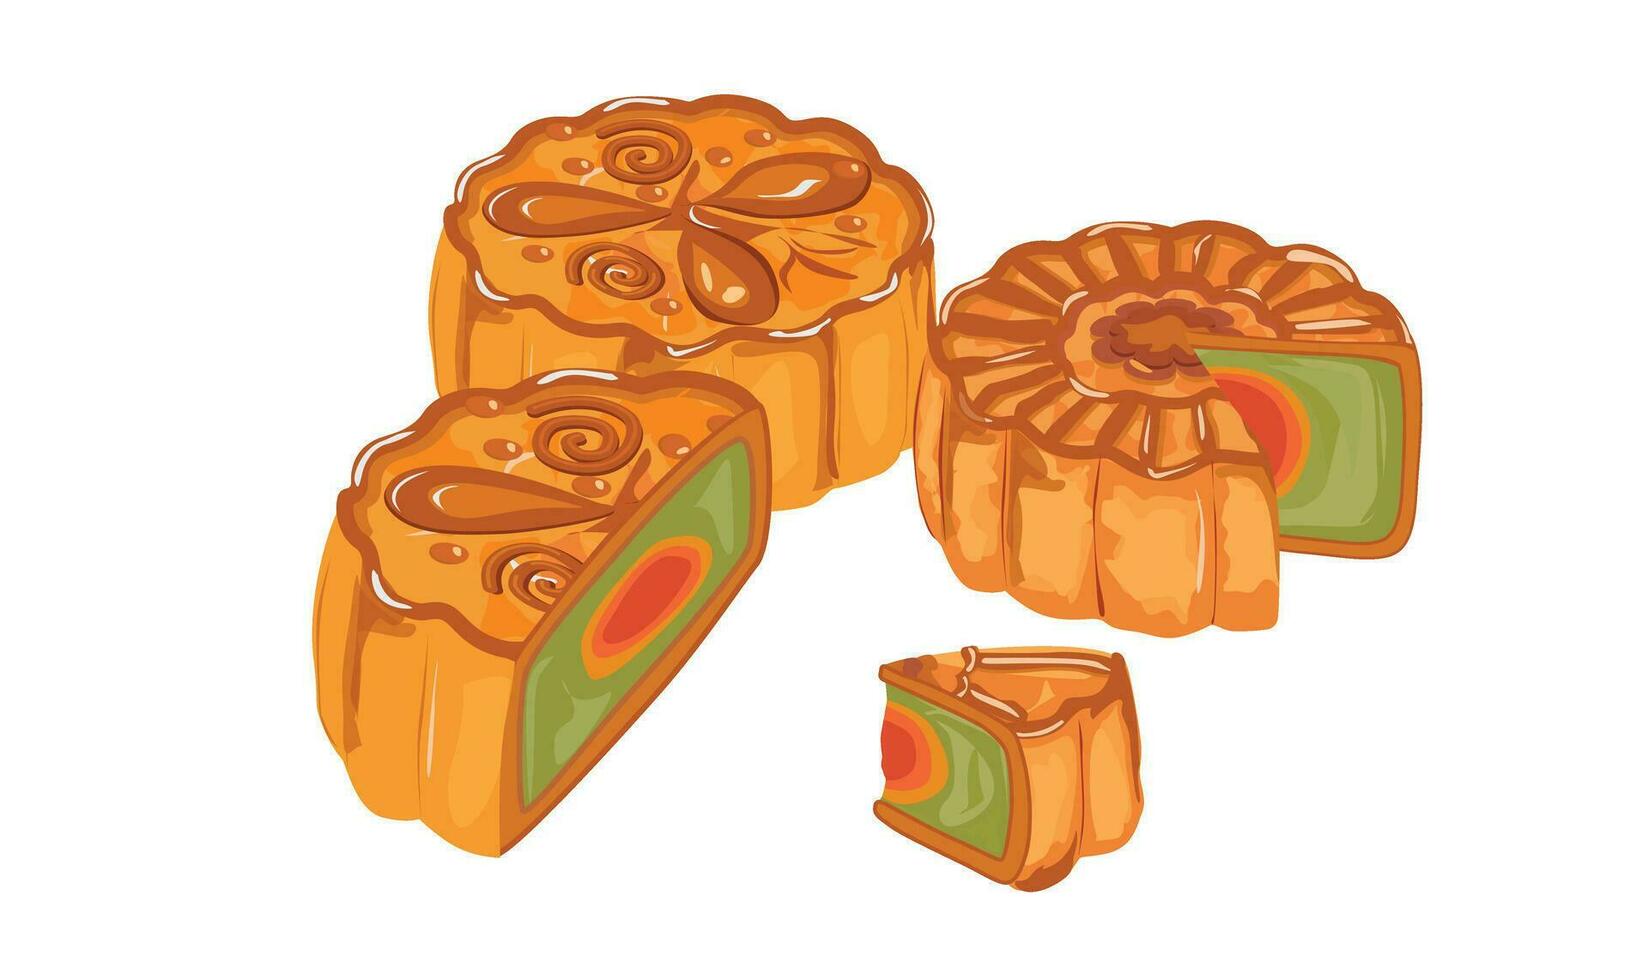 Mooncake vector illustration set. Traditional Chinese mooncake in whole full size, half sliced, pieces, quarter. Mooncake for mid autumn festival. Bakery. Asian food. Moon cake clip art.